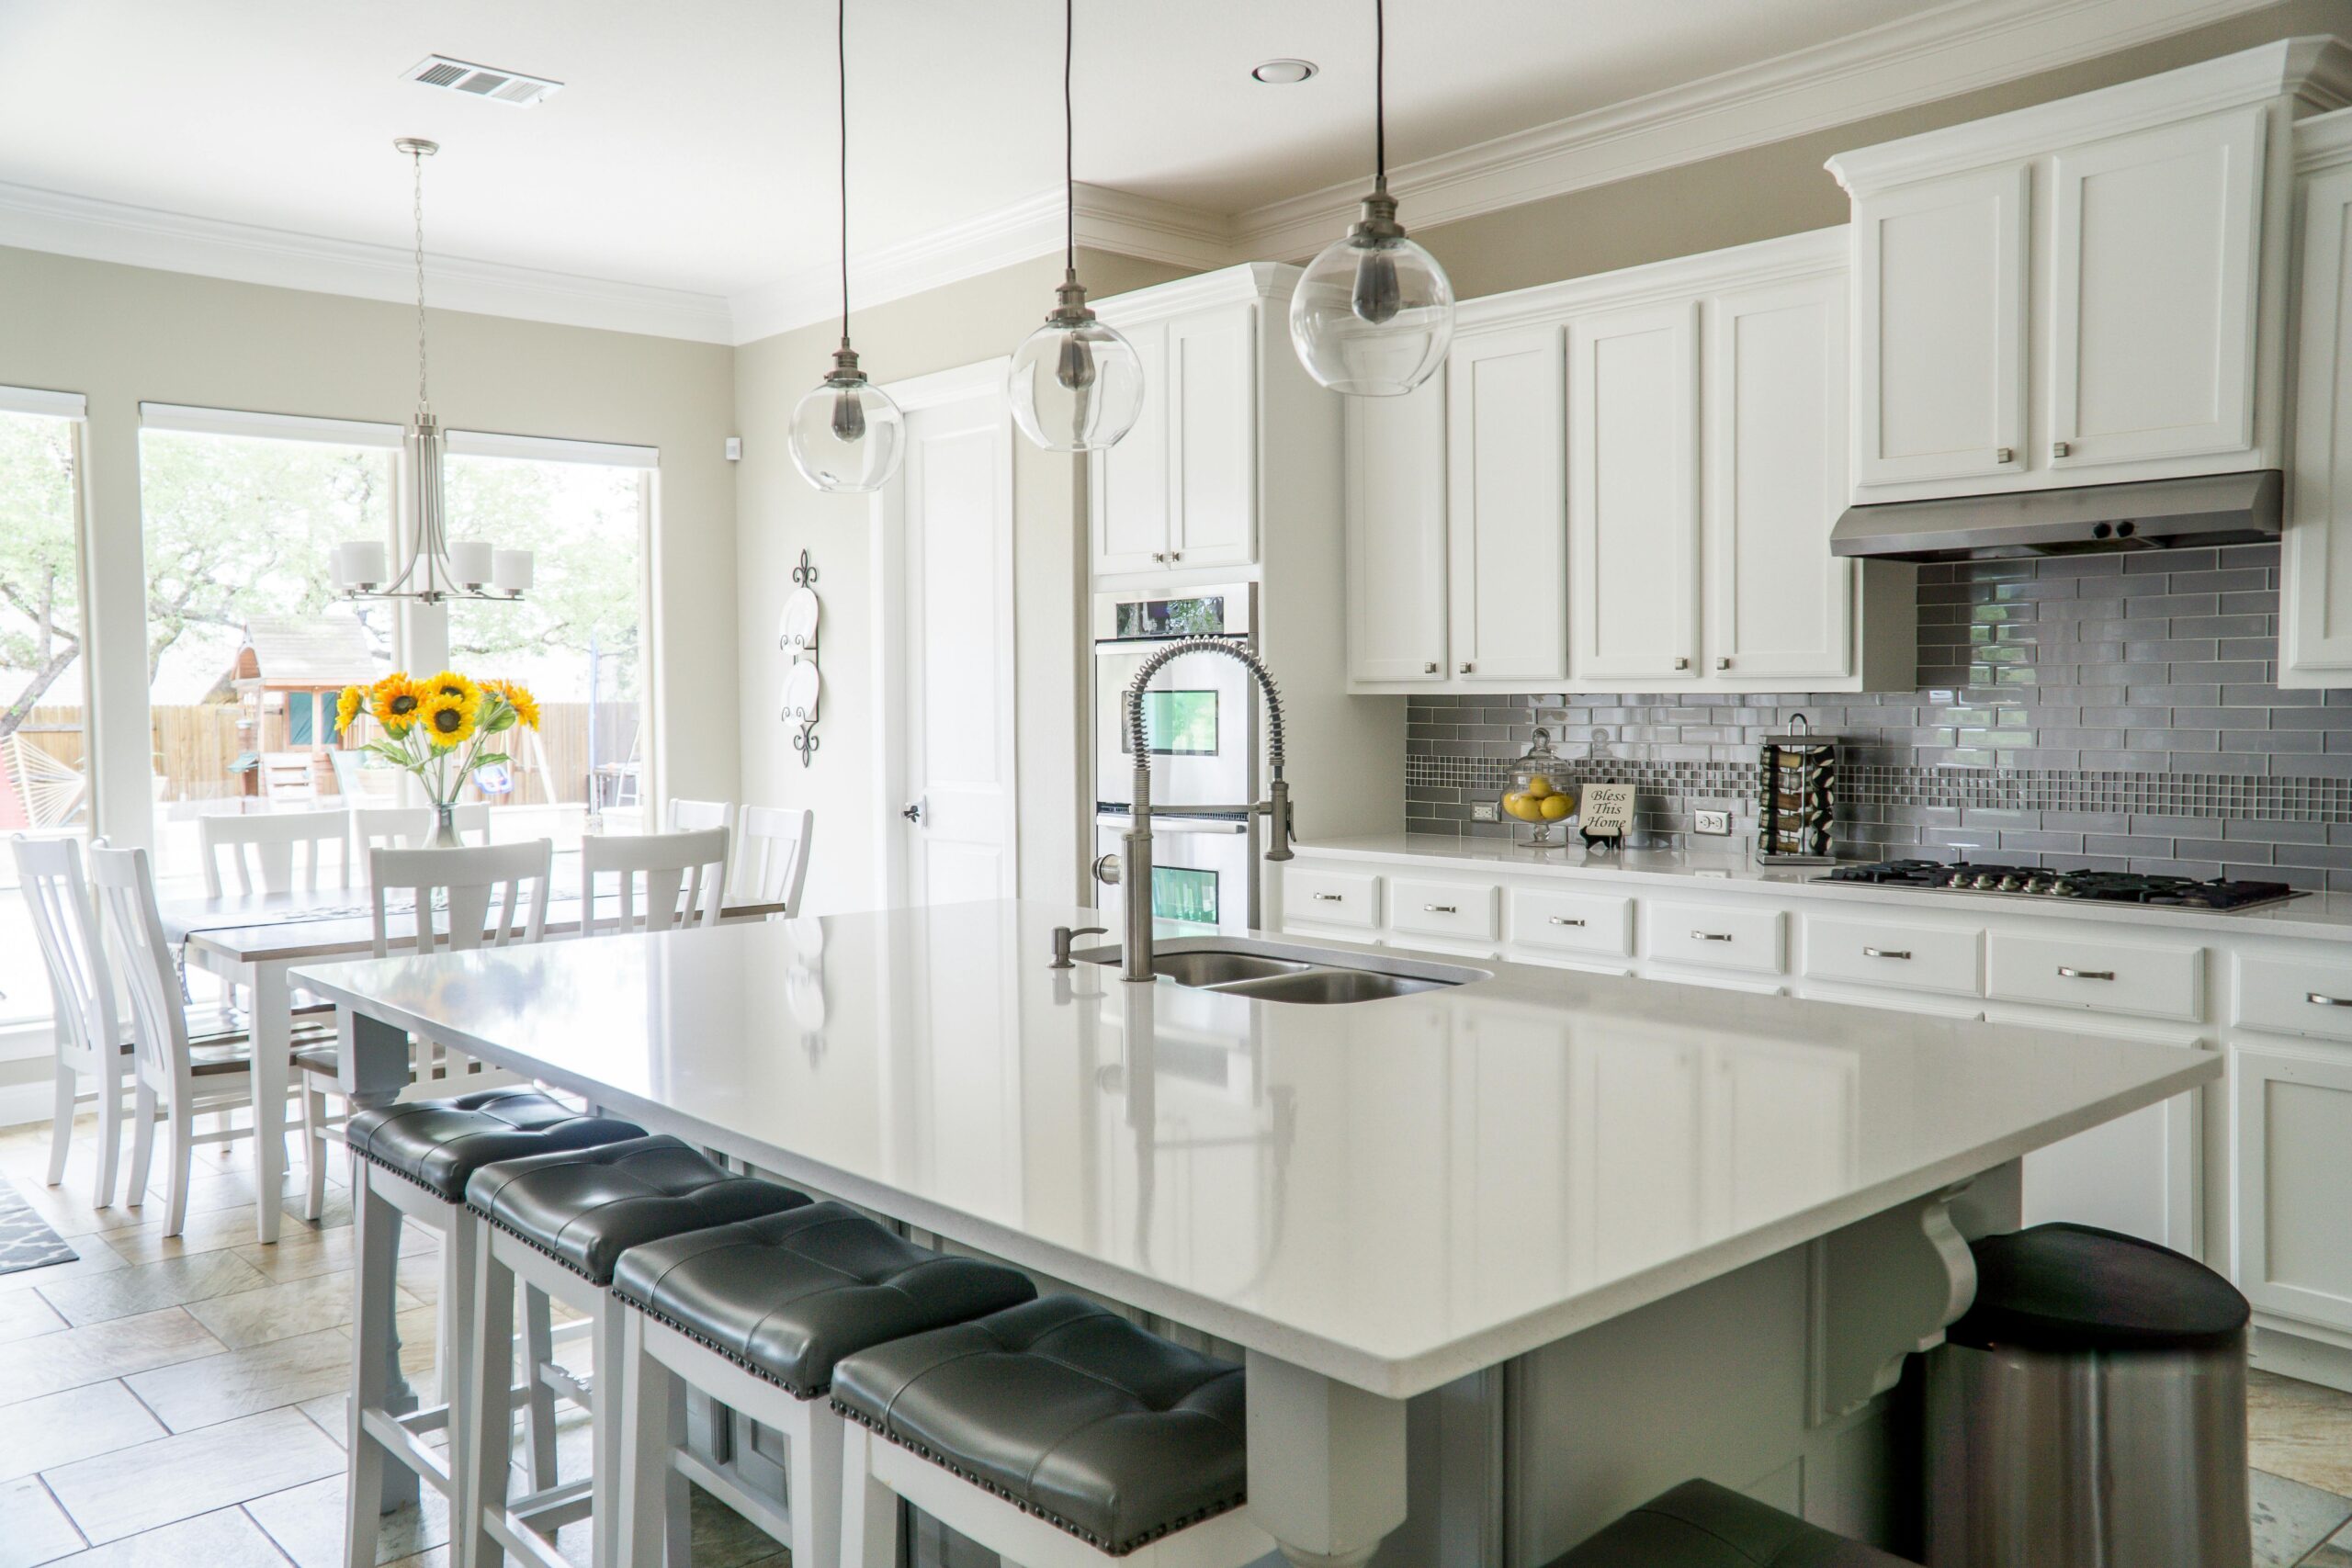 Incorporating Smart Technology in Your Kitchen Remodel